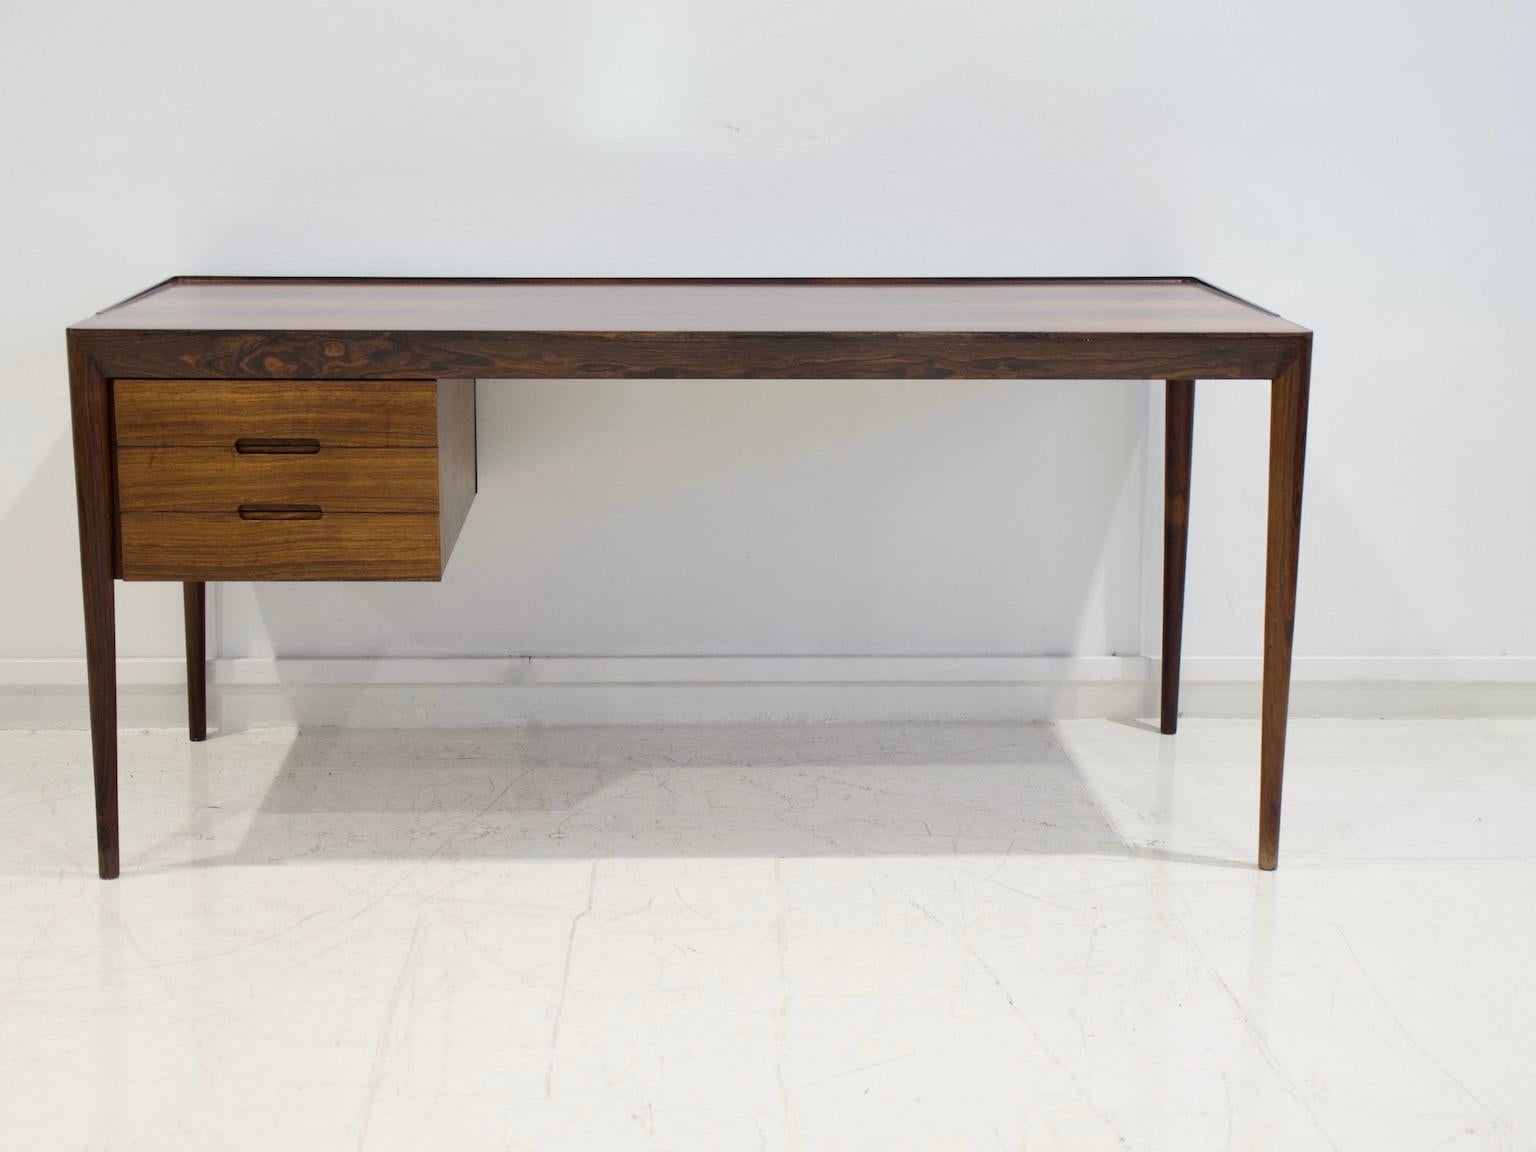 Sleek desk made of hardwood with partly raised edge. Slim tapered legs. Drawer section with three drawers. Designed by Erik Riisager Hansen and manufactured by Haslev Møbelsnedkeri.
Literature: Catalogue from Danish Furniture Maker's Control